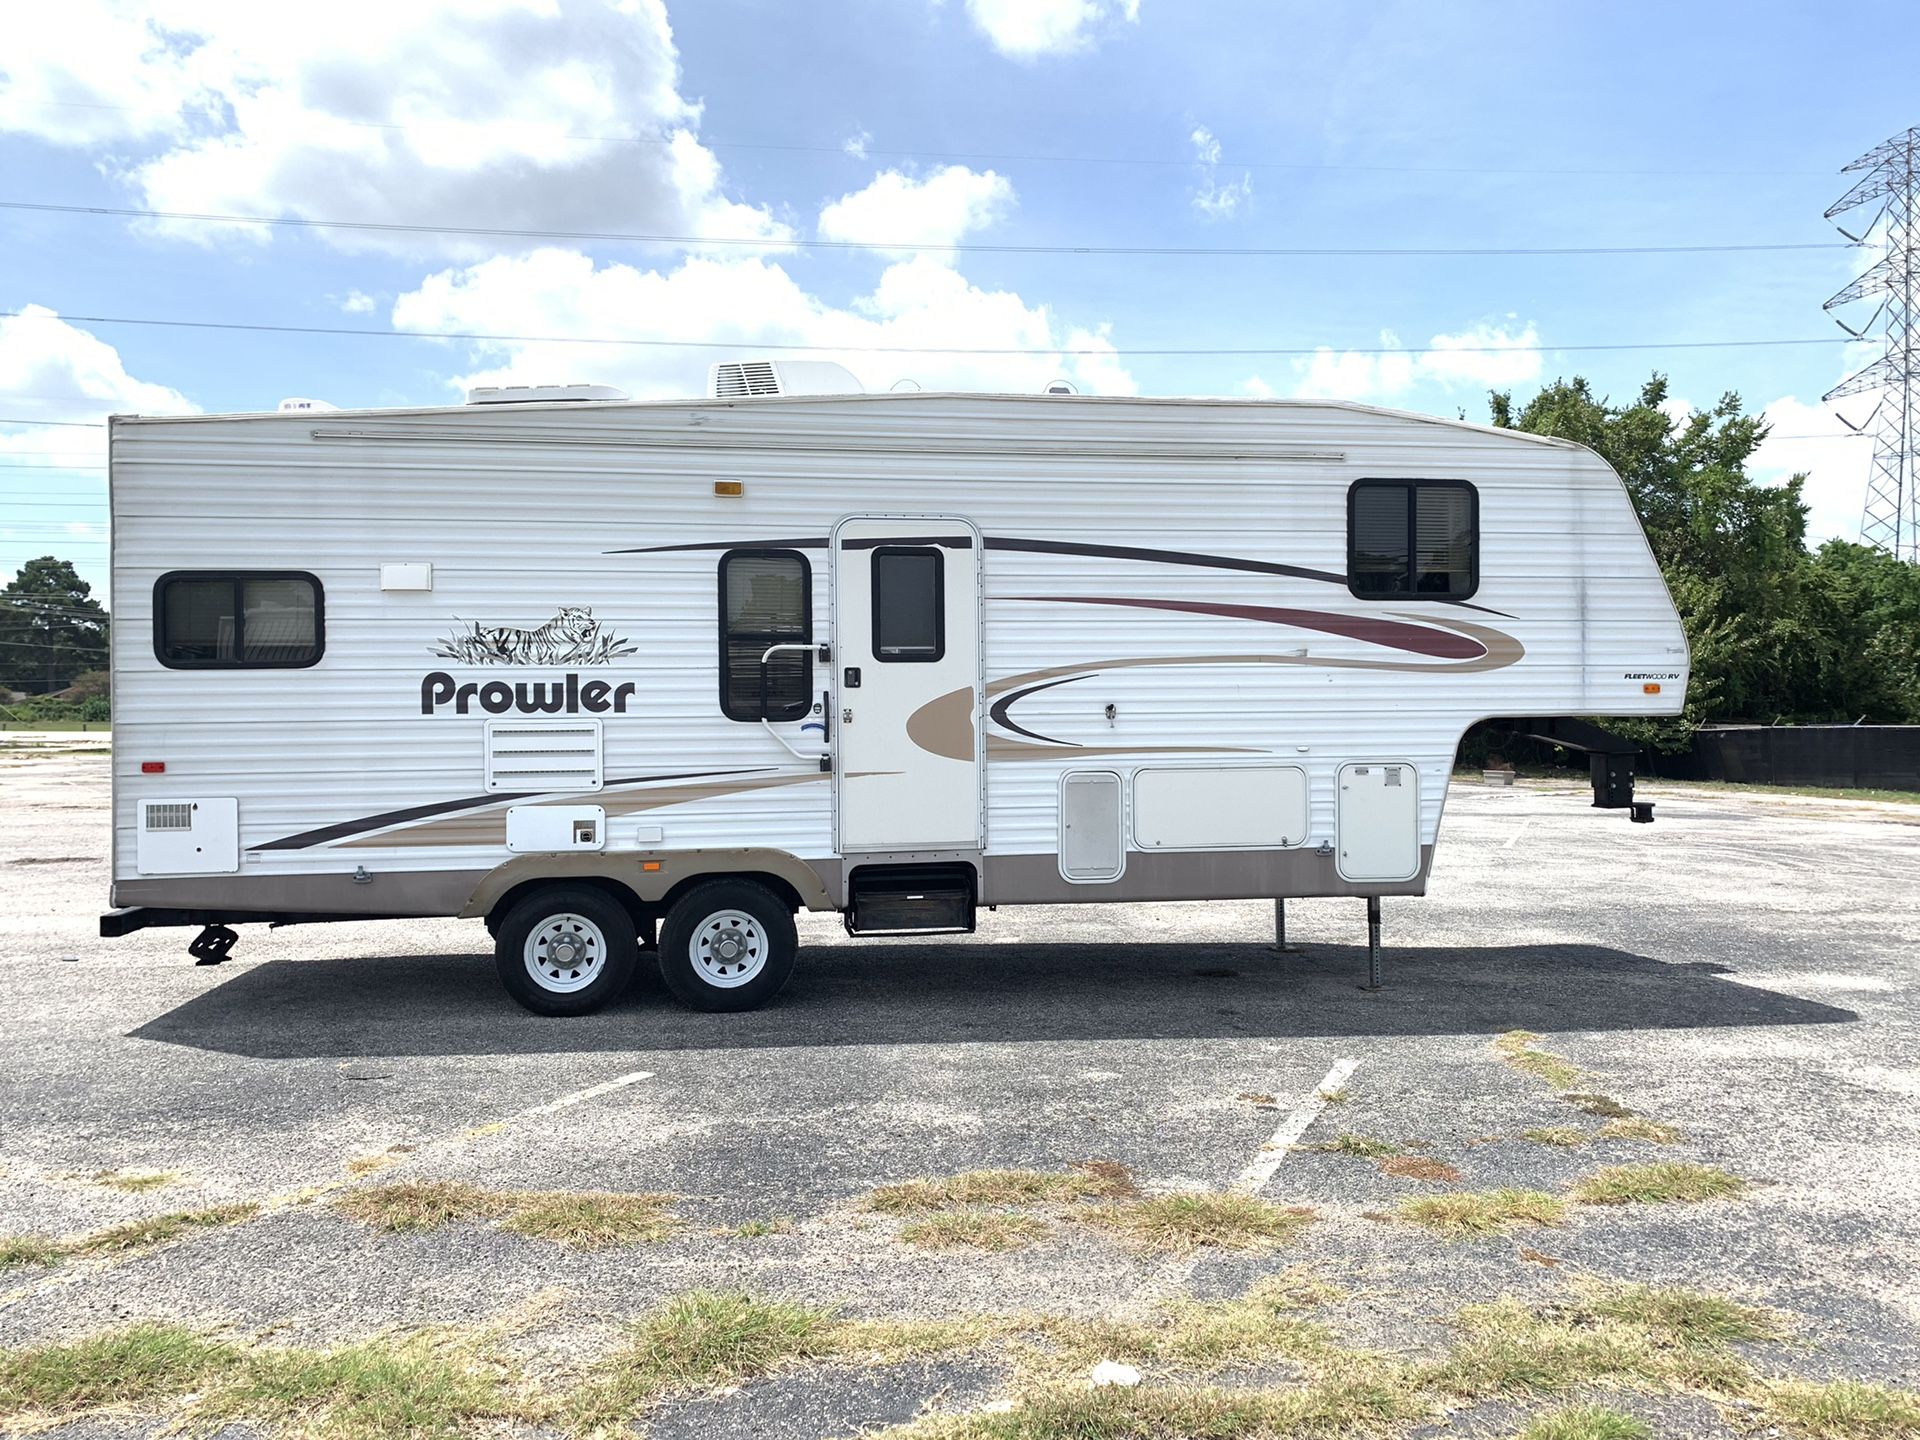 2004 Prowler 30FT 5TH WHEEL GOOSE NECK SUPER SLIDE OUT REAR KITCHEN SLEEP 6 LITE WEIGHT America Favorite Brand Fleetwood Prowler Top Of The Line